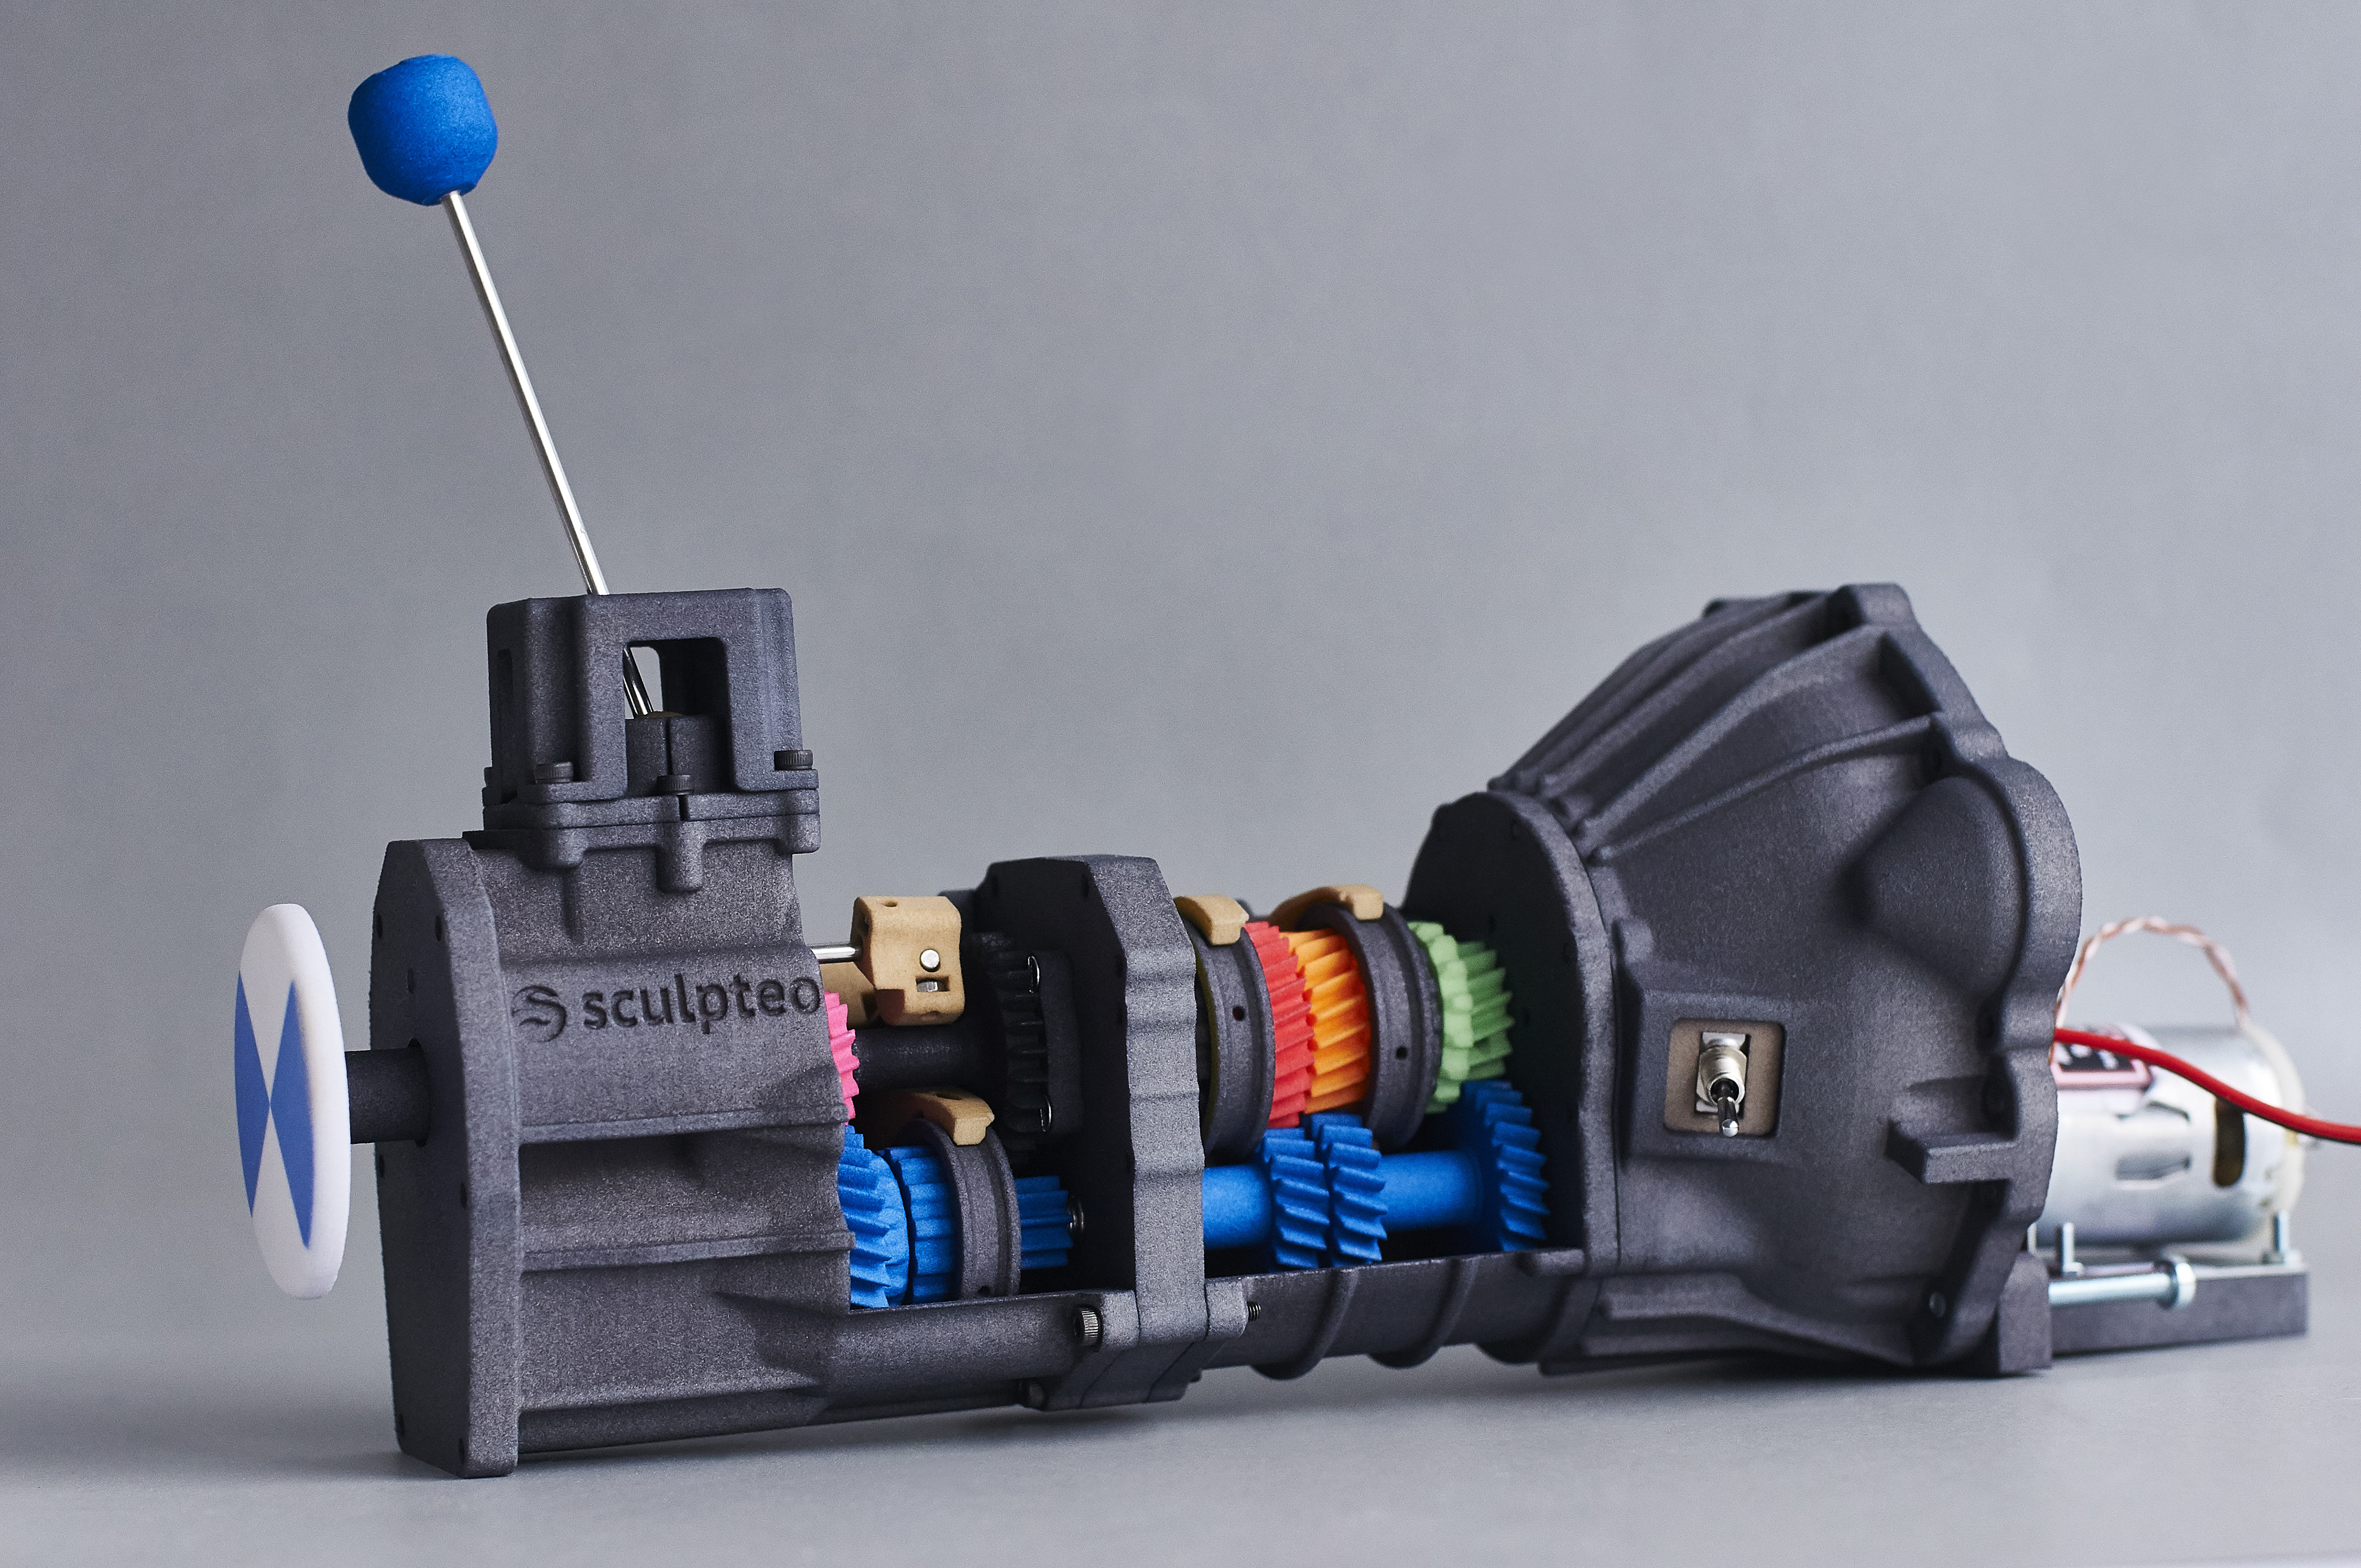 Maximize your ROI from 3D printing | Sculpteo Blog